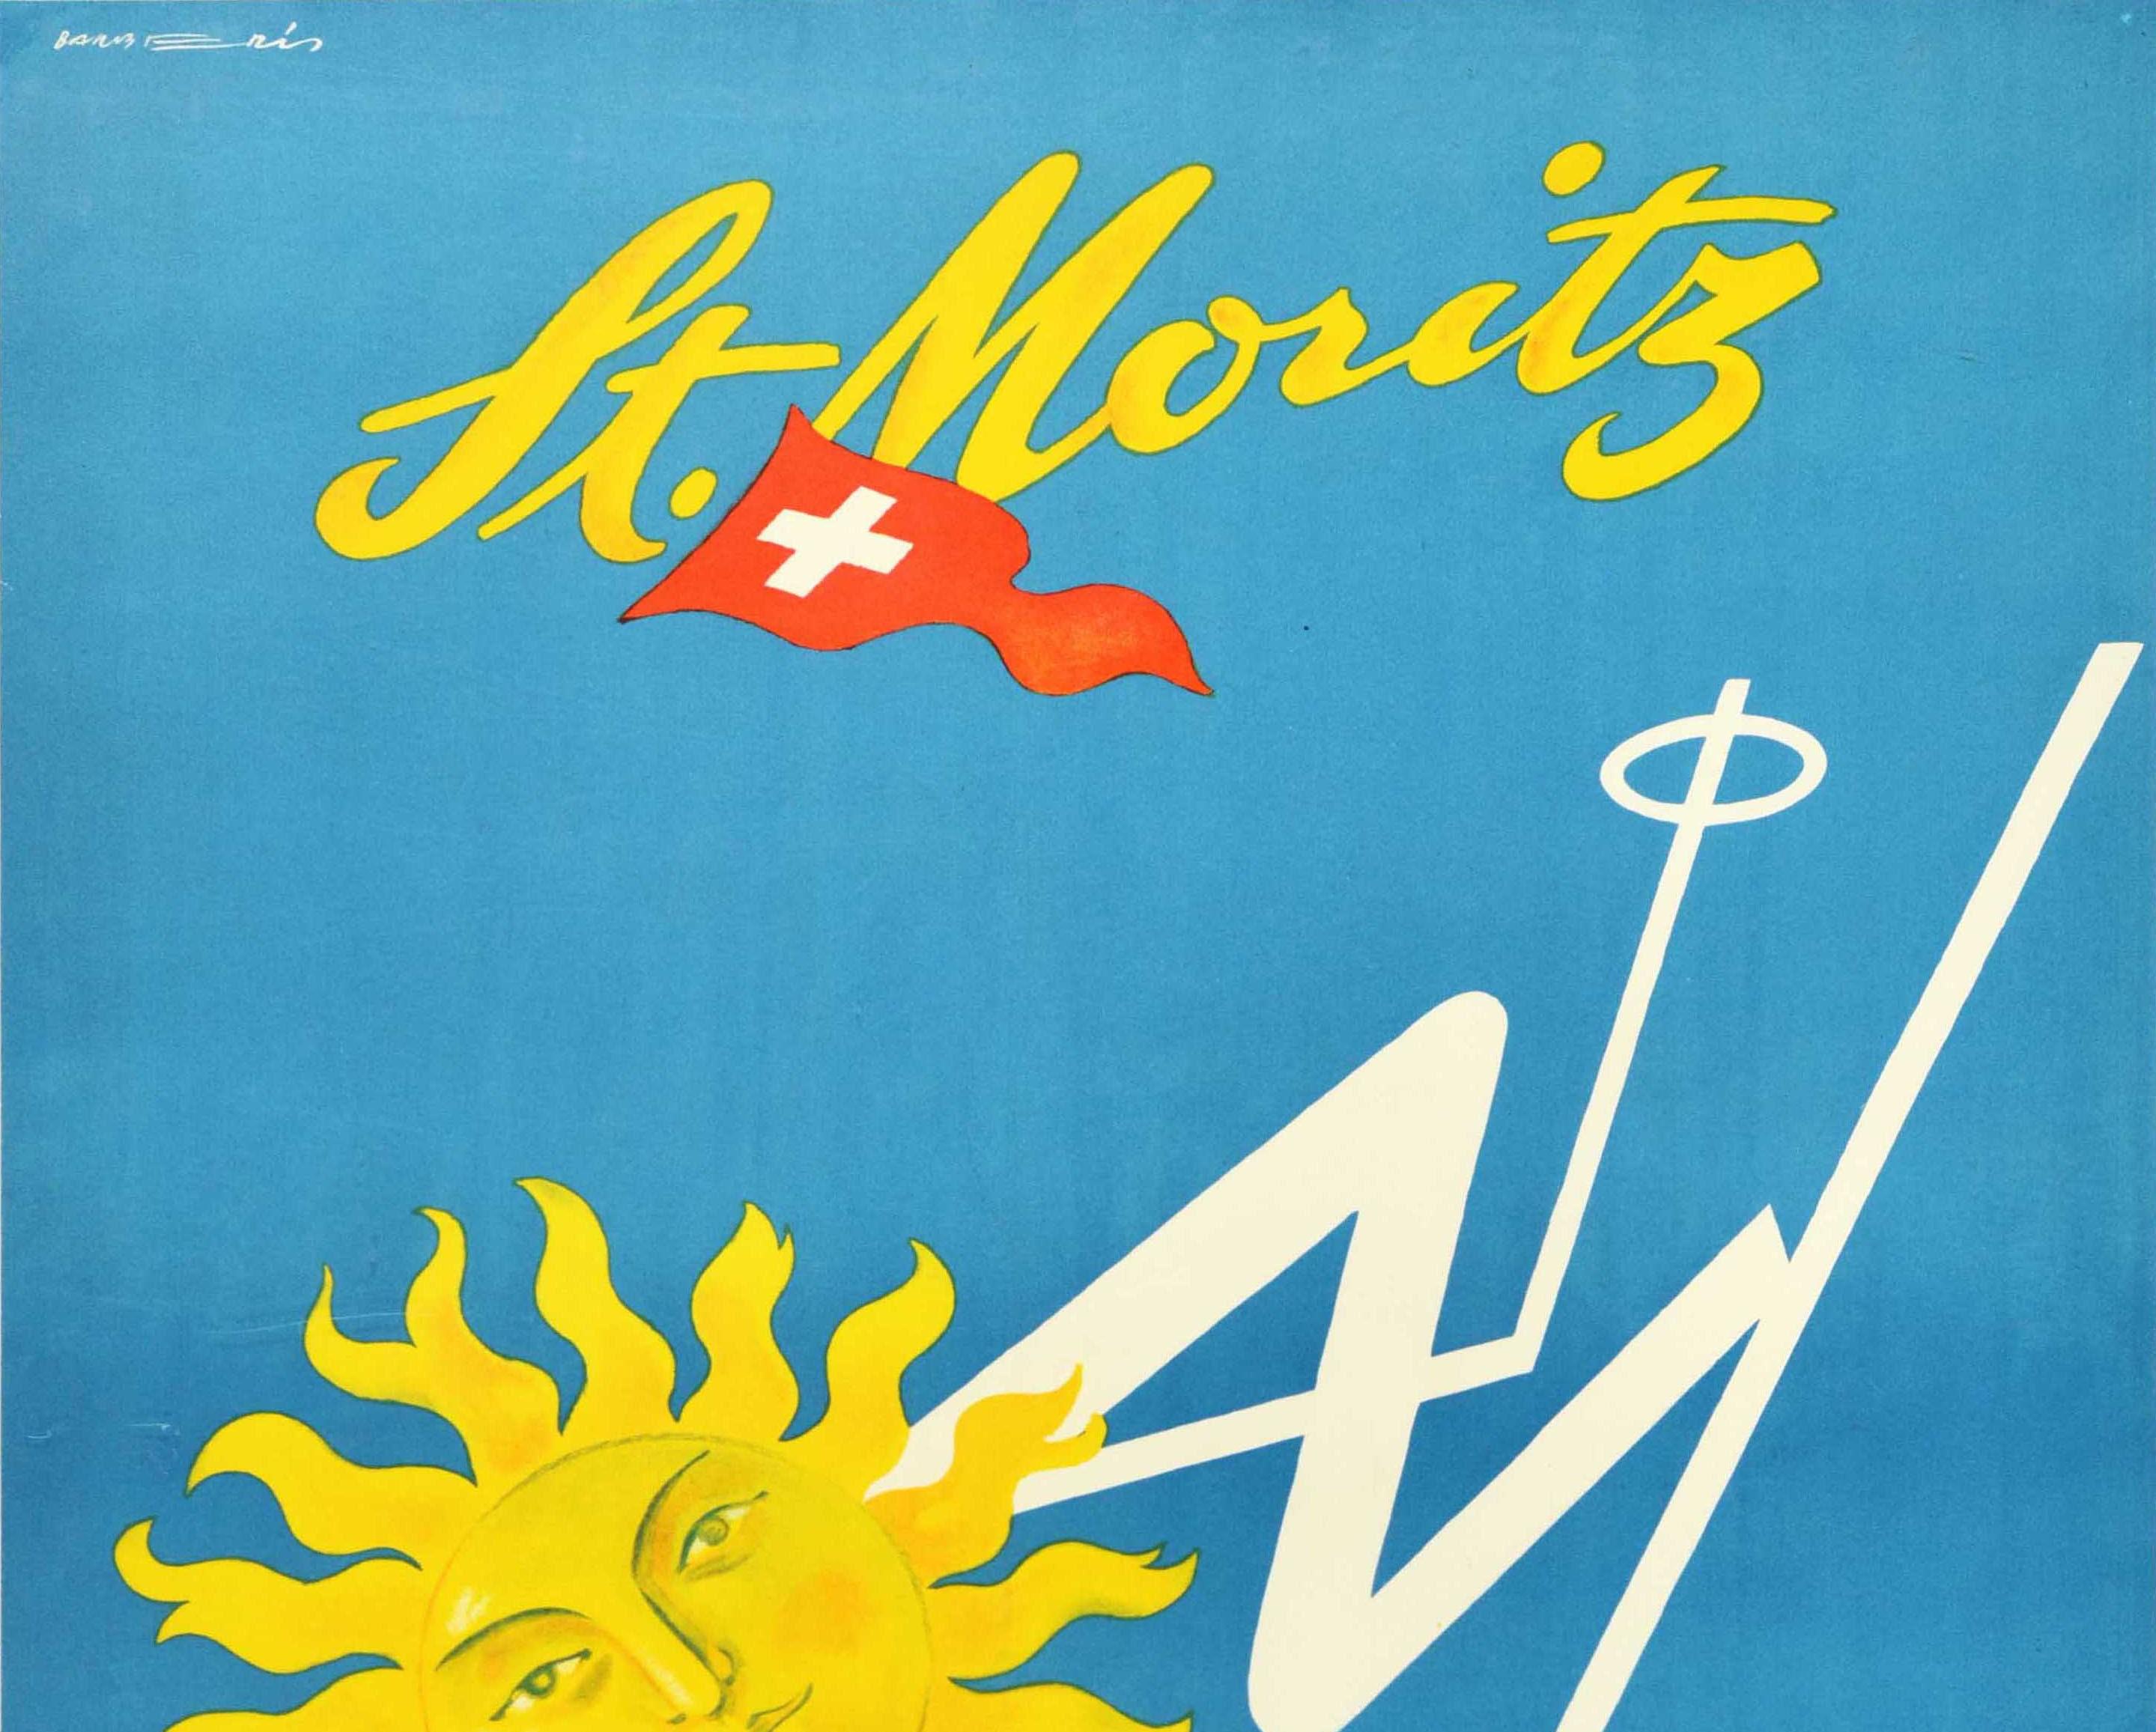 Original vintage winter sport travel poster for the ski resort of St Moritz featuring a great design by the Swiss artist Franco Barberis (1905-1992) depicting the St Moritz smiling sun logo in the shape of a skier on skis, looking at the viewer and